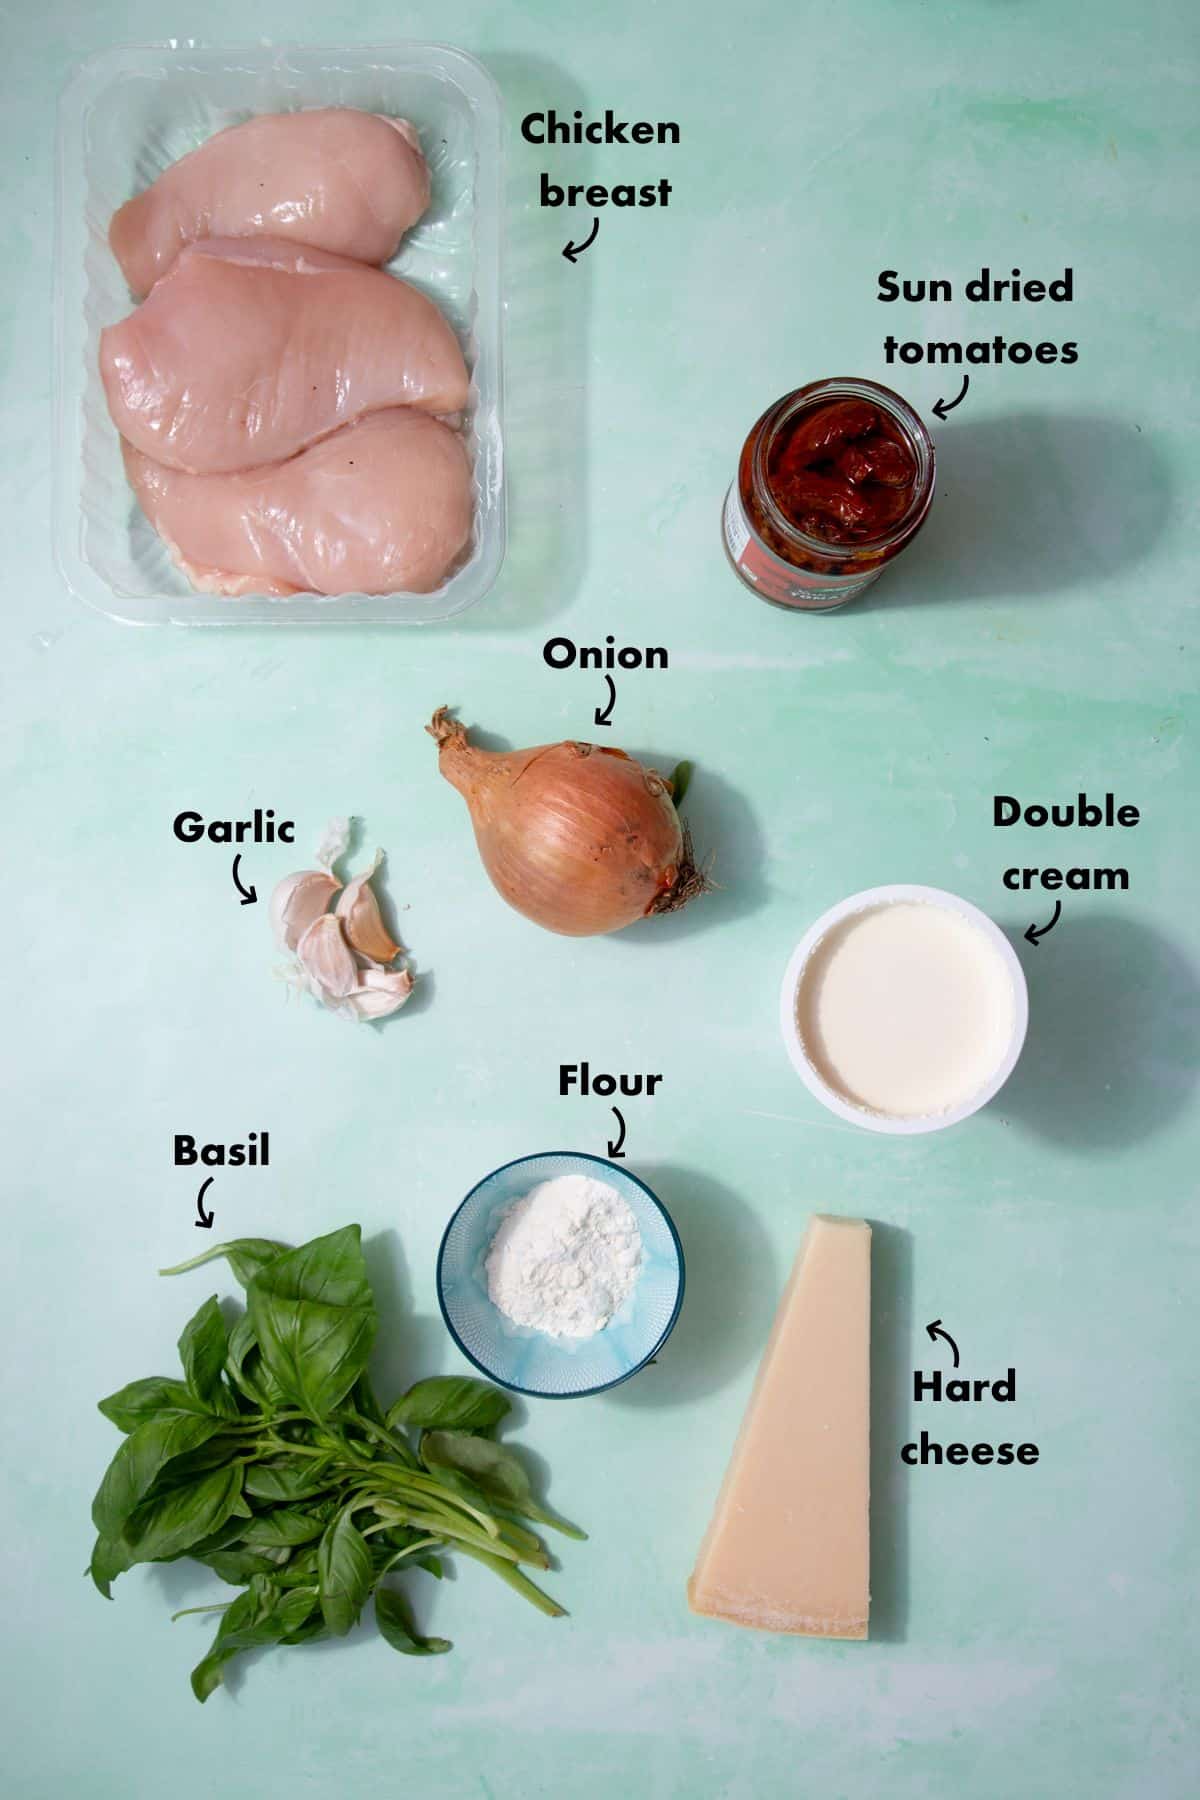 Ingredients to make creamy tomato chicken recipes laid out on a pale blue back ground and labelled.